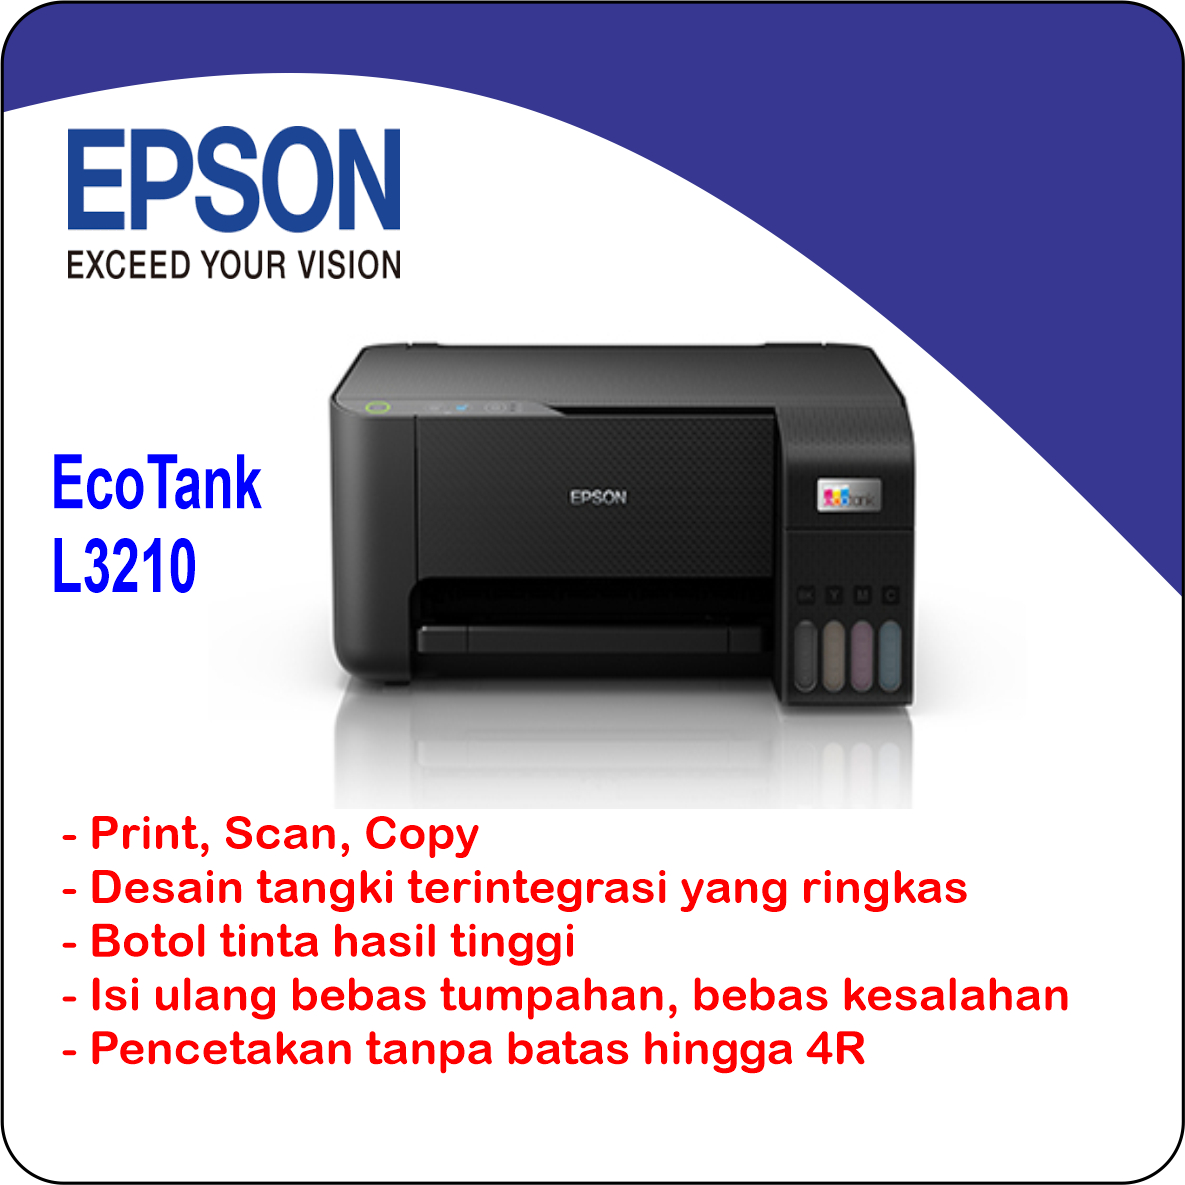 Epson Ecotank L3210 A4 All In One Ink Tank Printer Siplah 2203